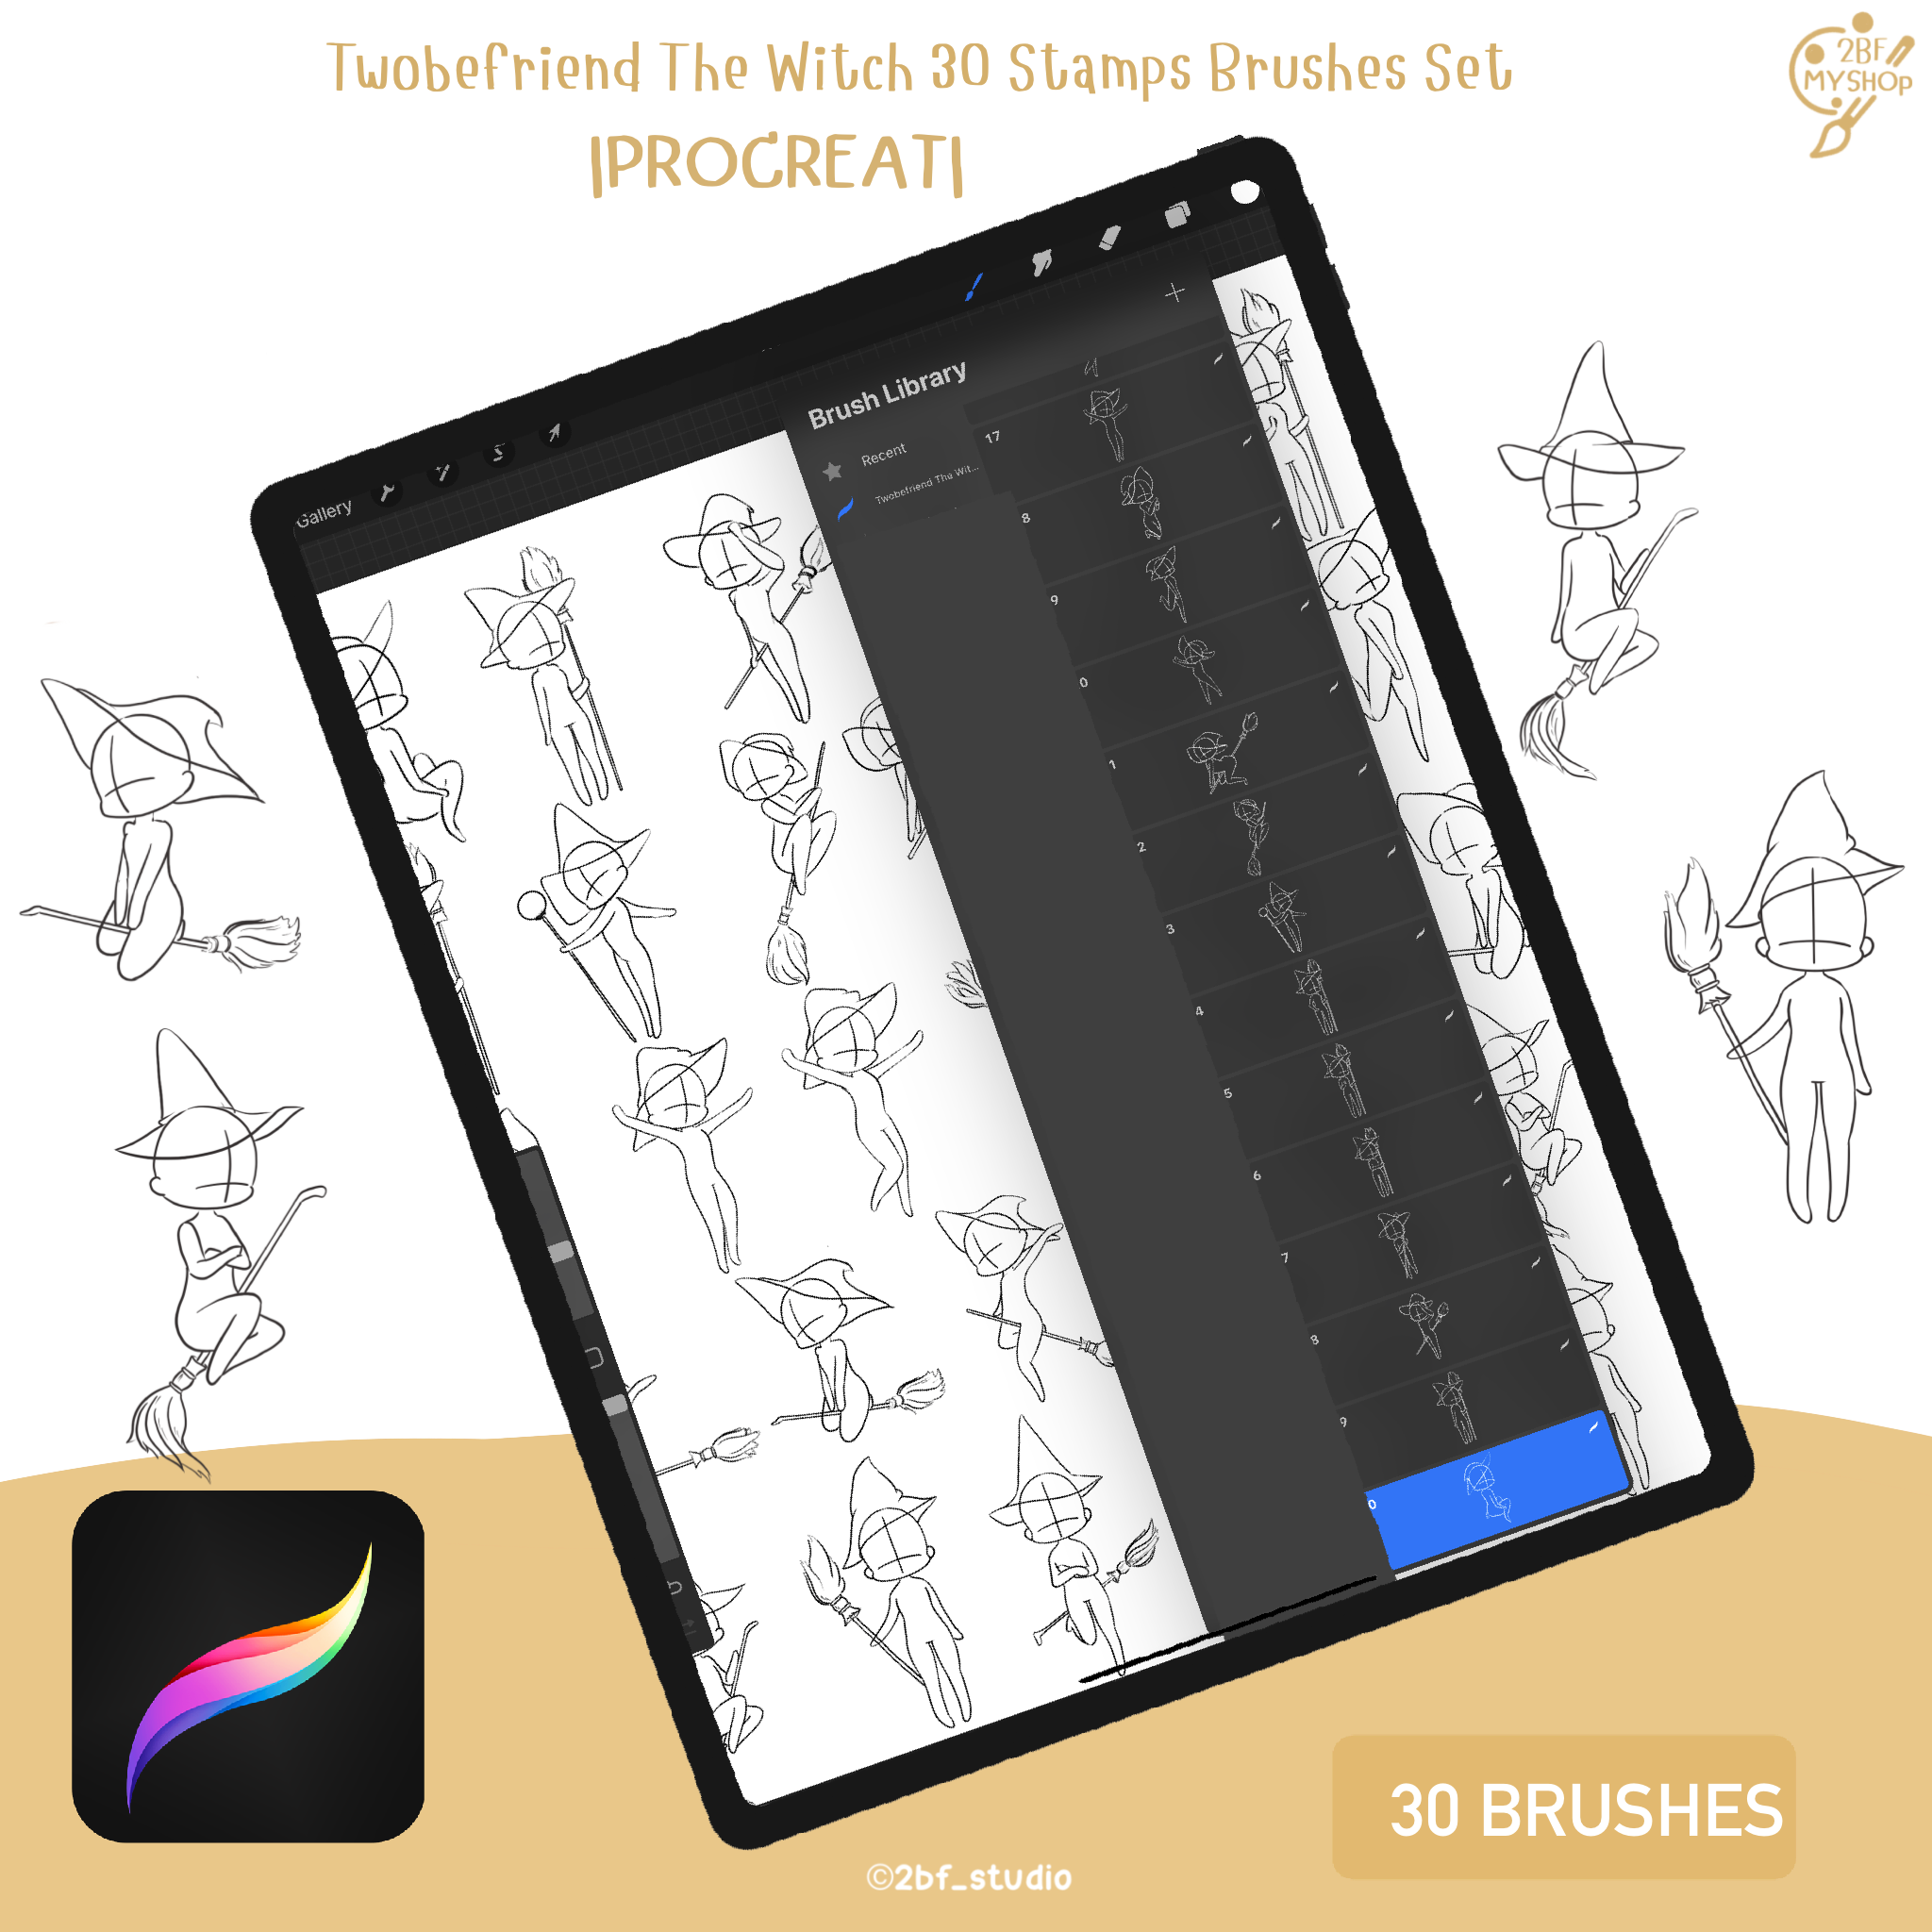 Twobefriend The Witch 30 Stamps Brushes Set |PROCREAT BRUSHED|